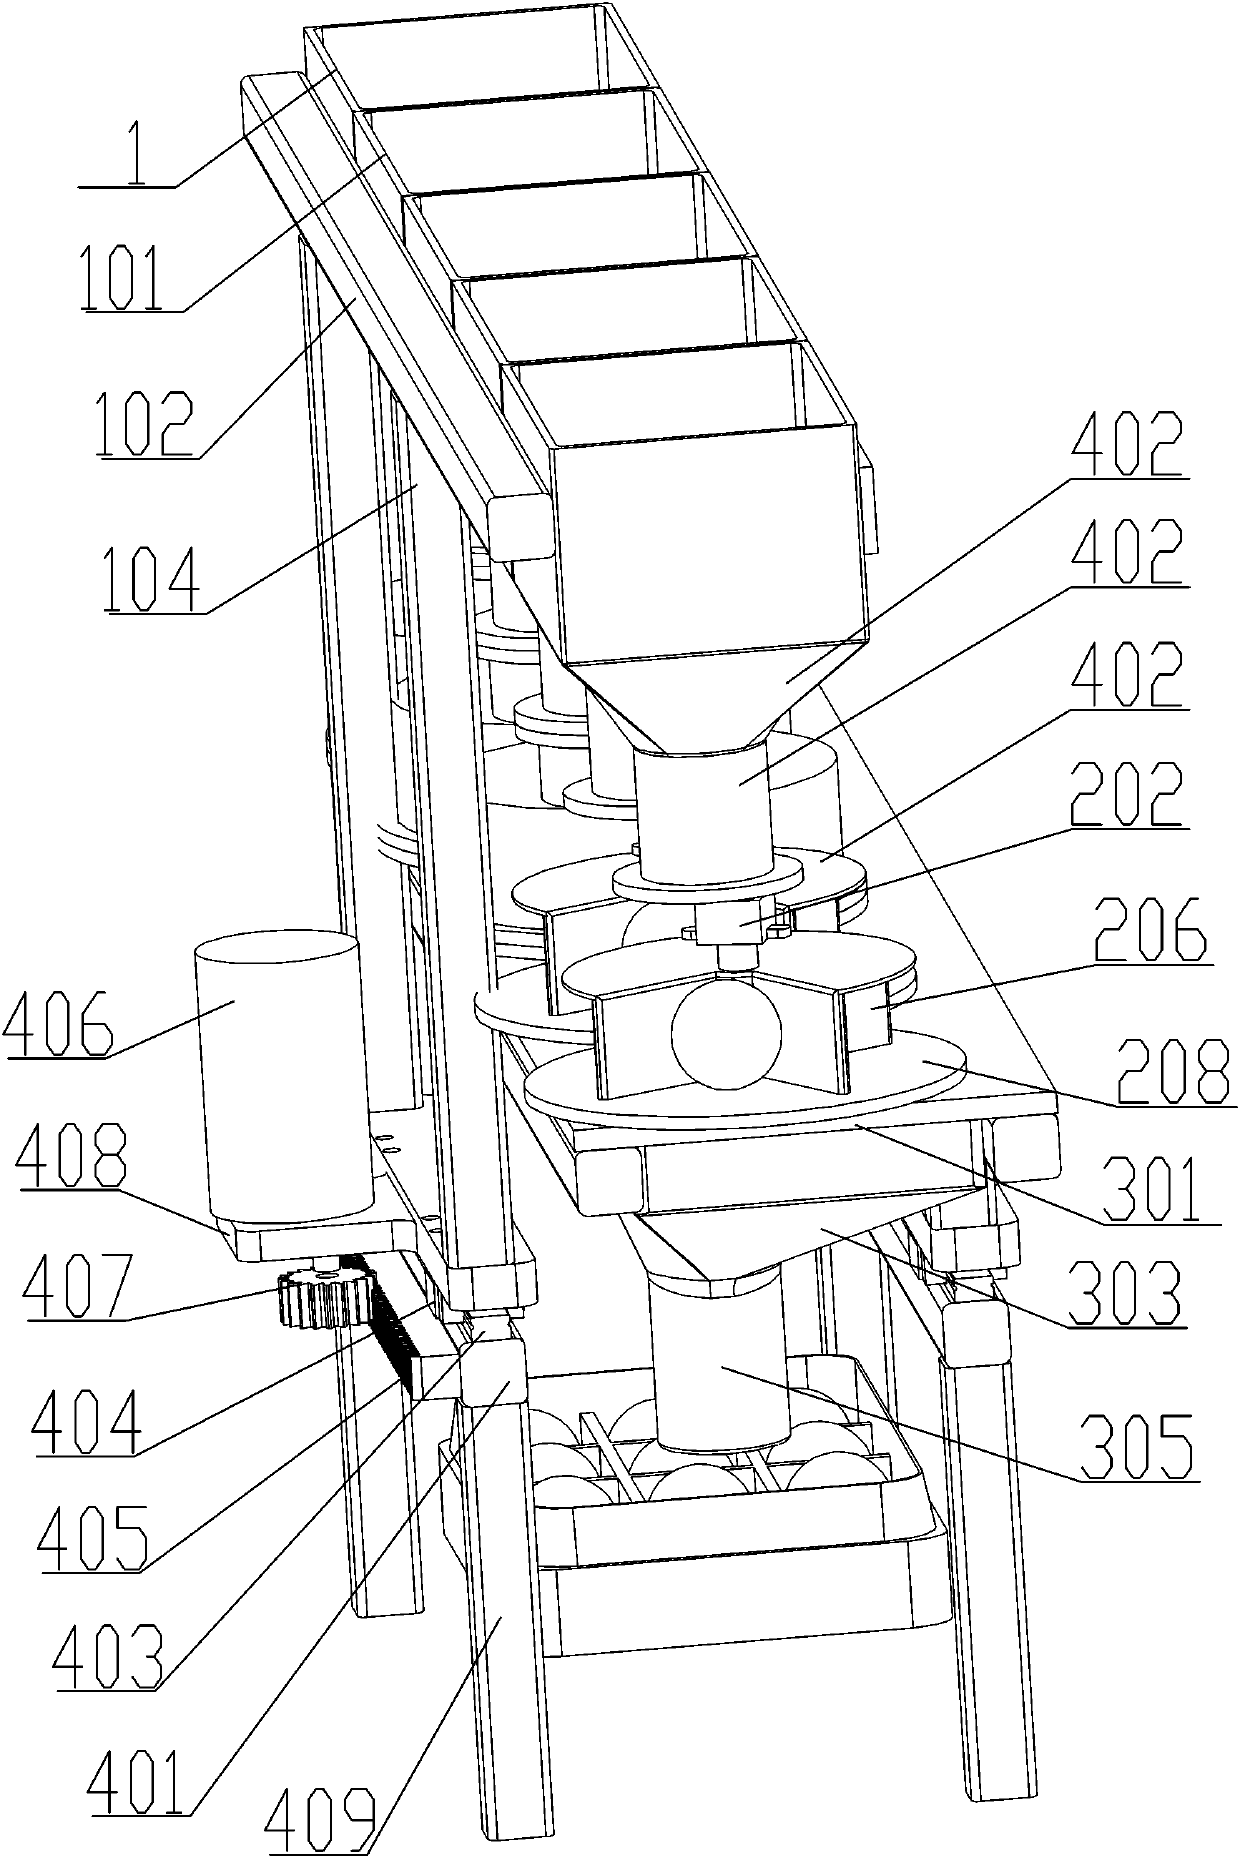 Automatic fruit package discharging mechanism and operation method